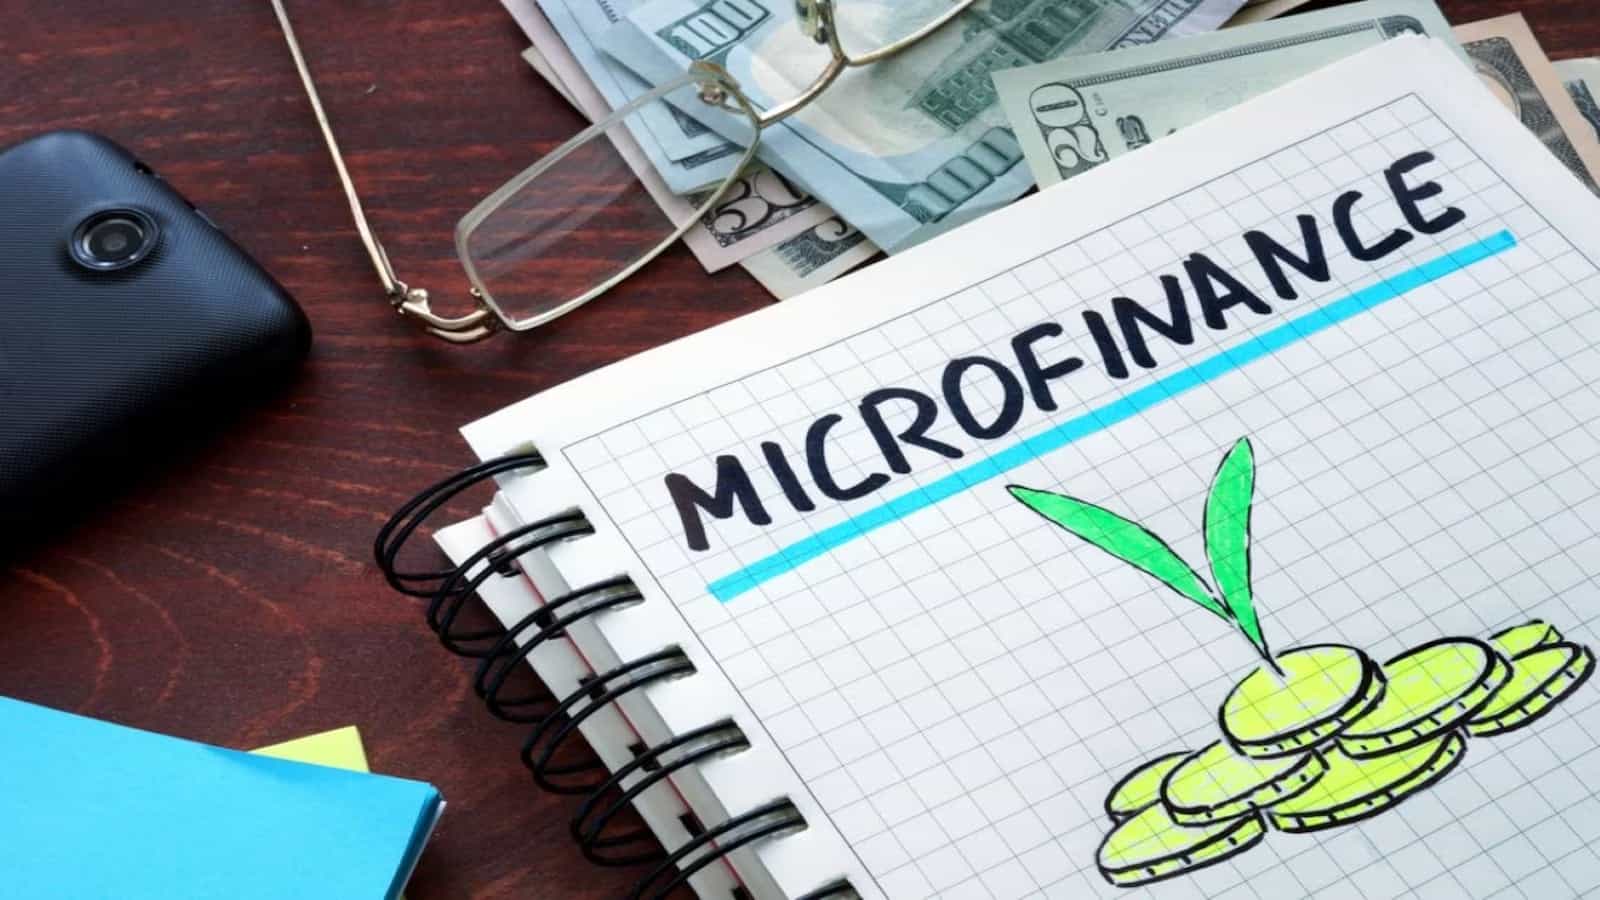 Microfinance Laws in Nevada: A Tool for Community Development